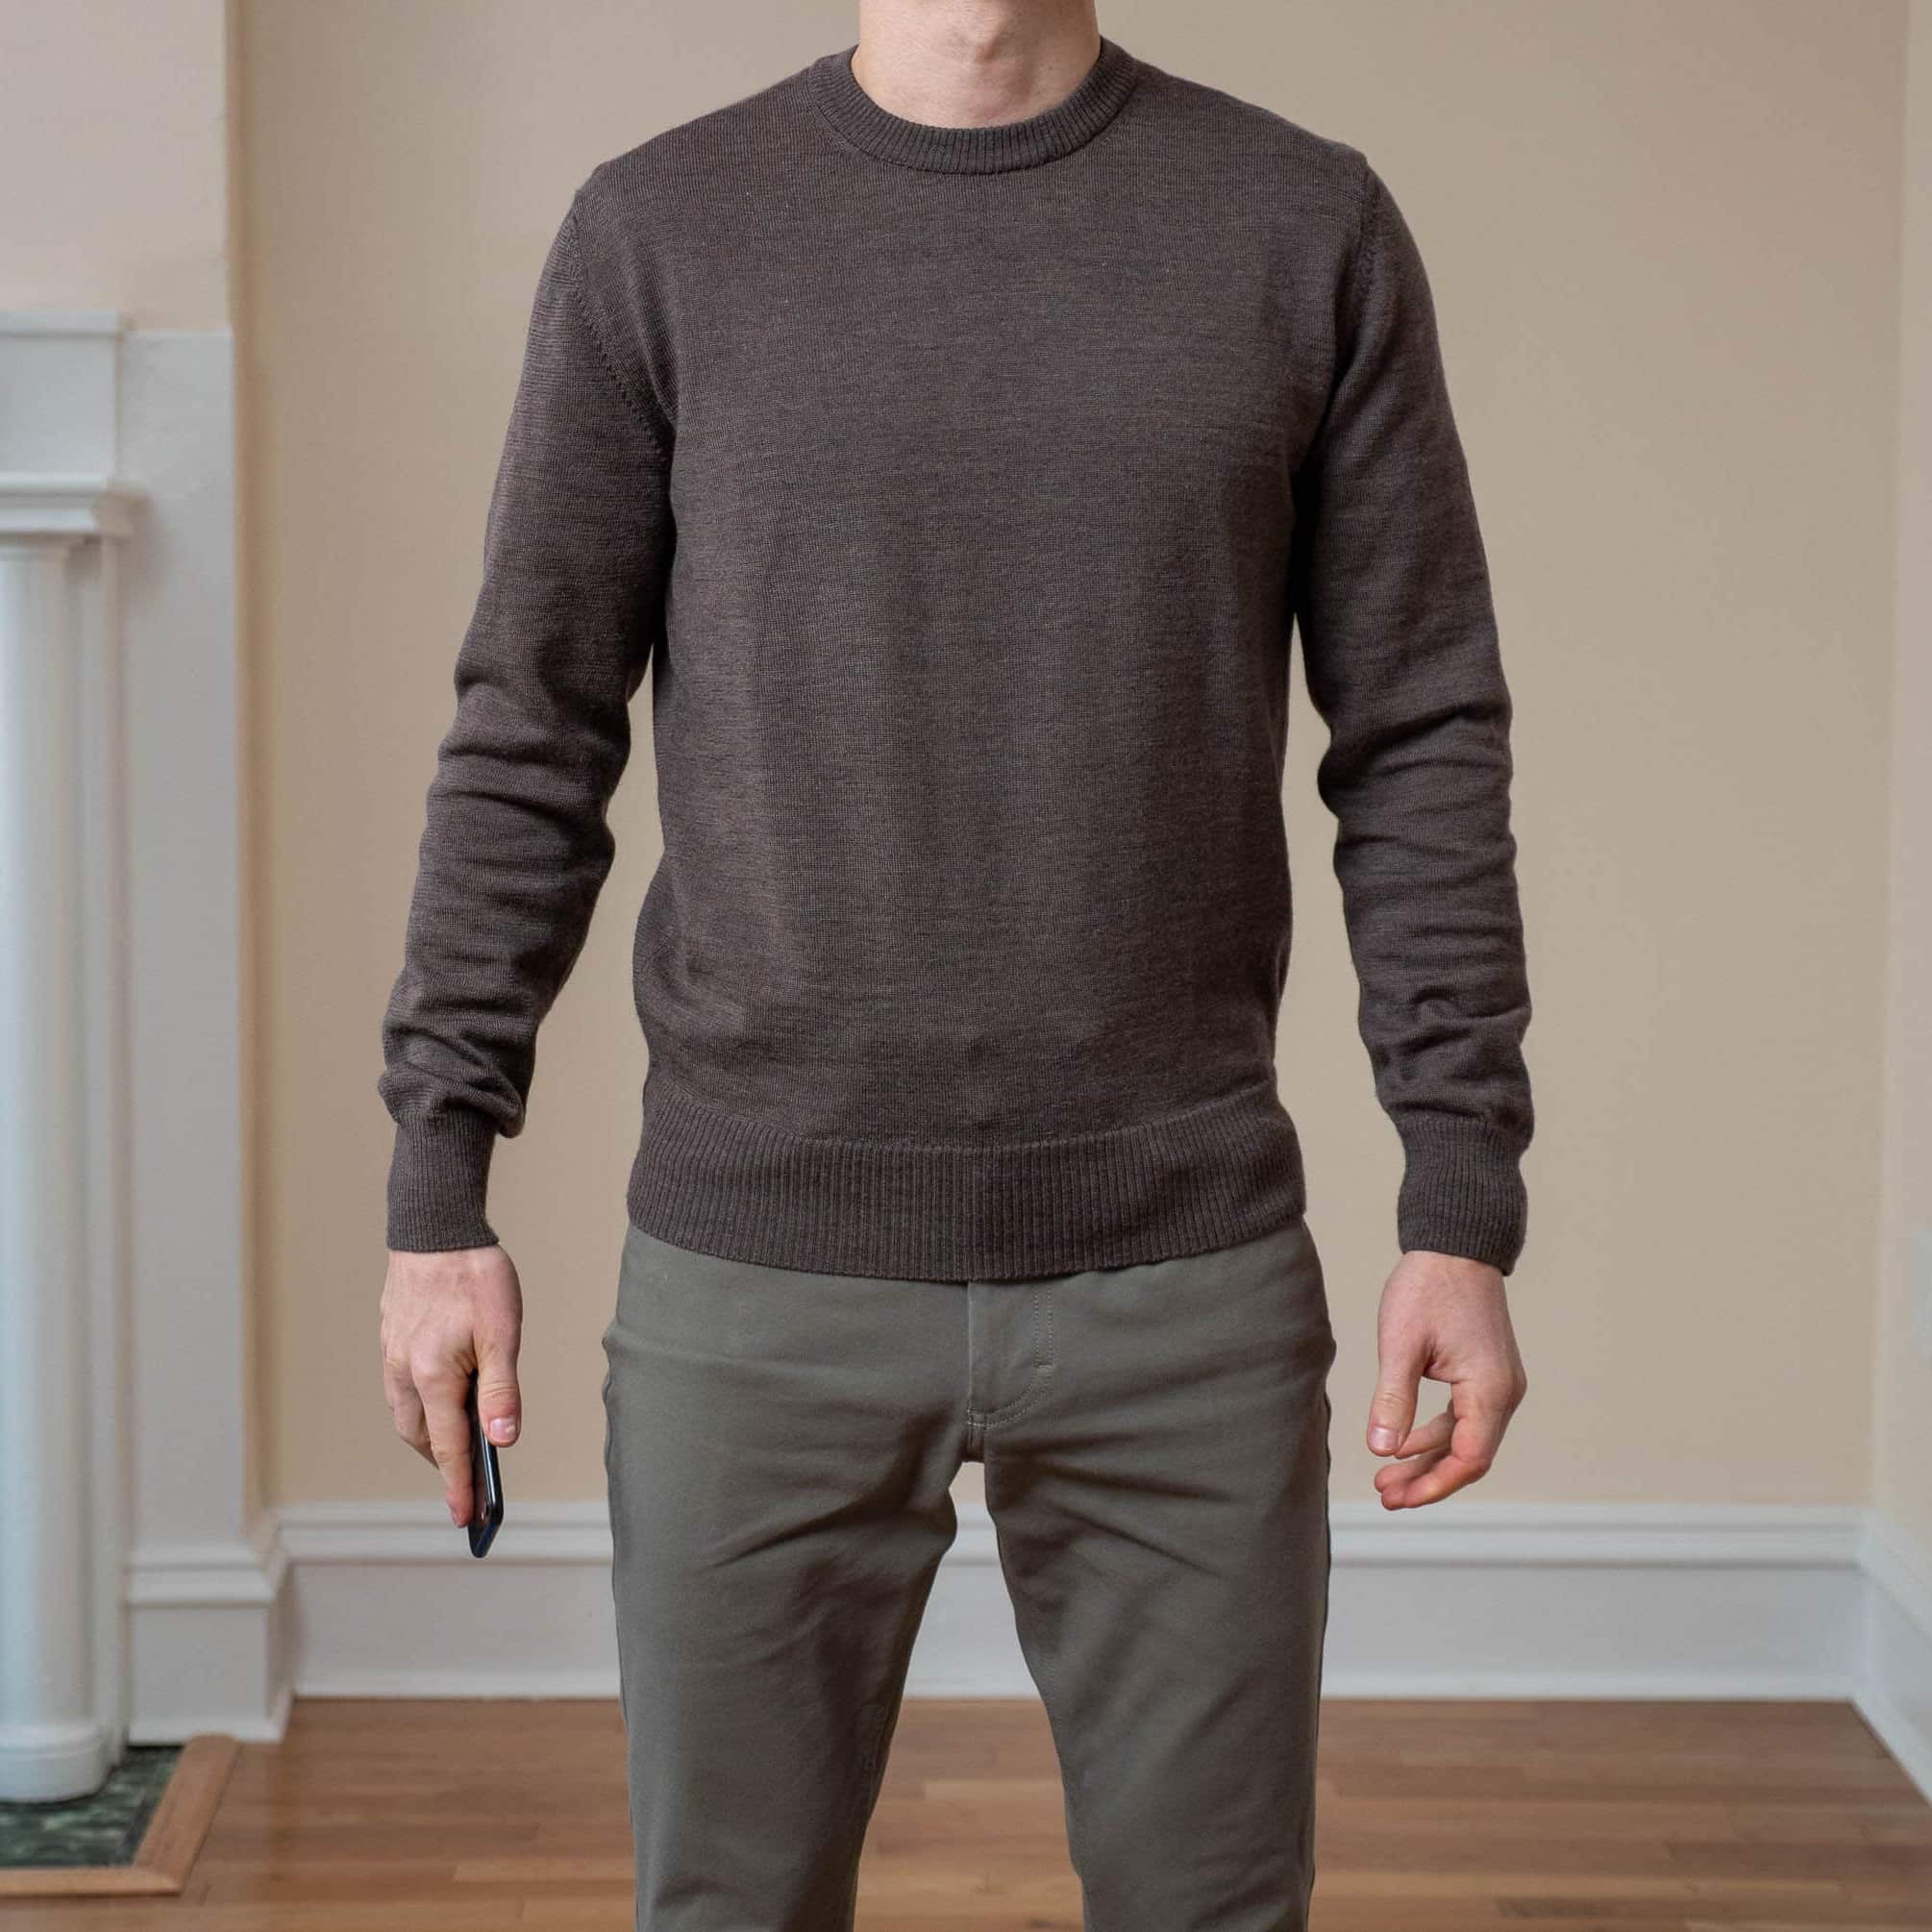 20 Sustainable Clothing Brands For Men Of Style